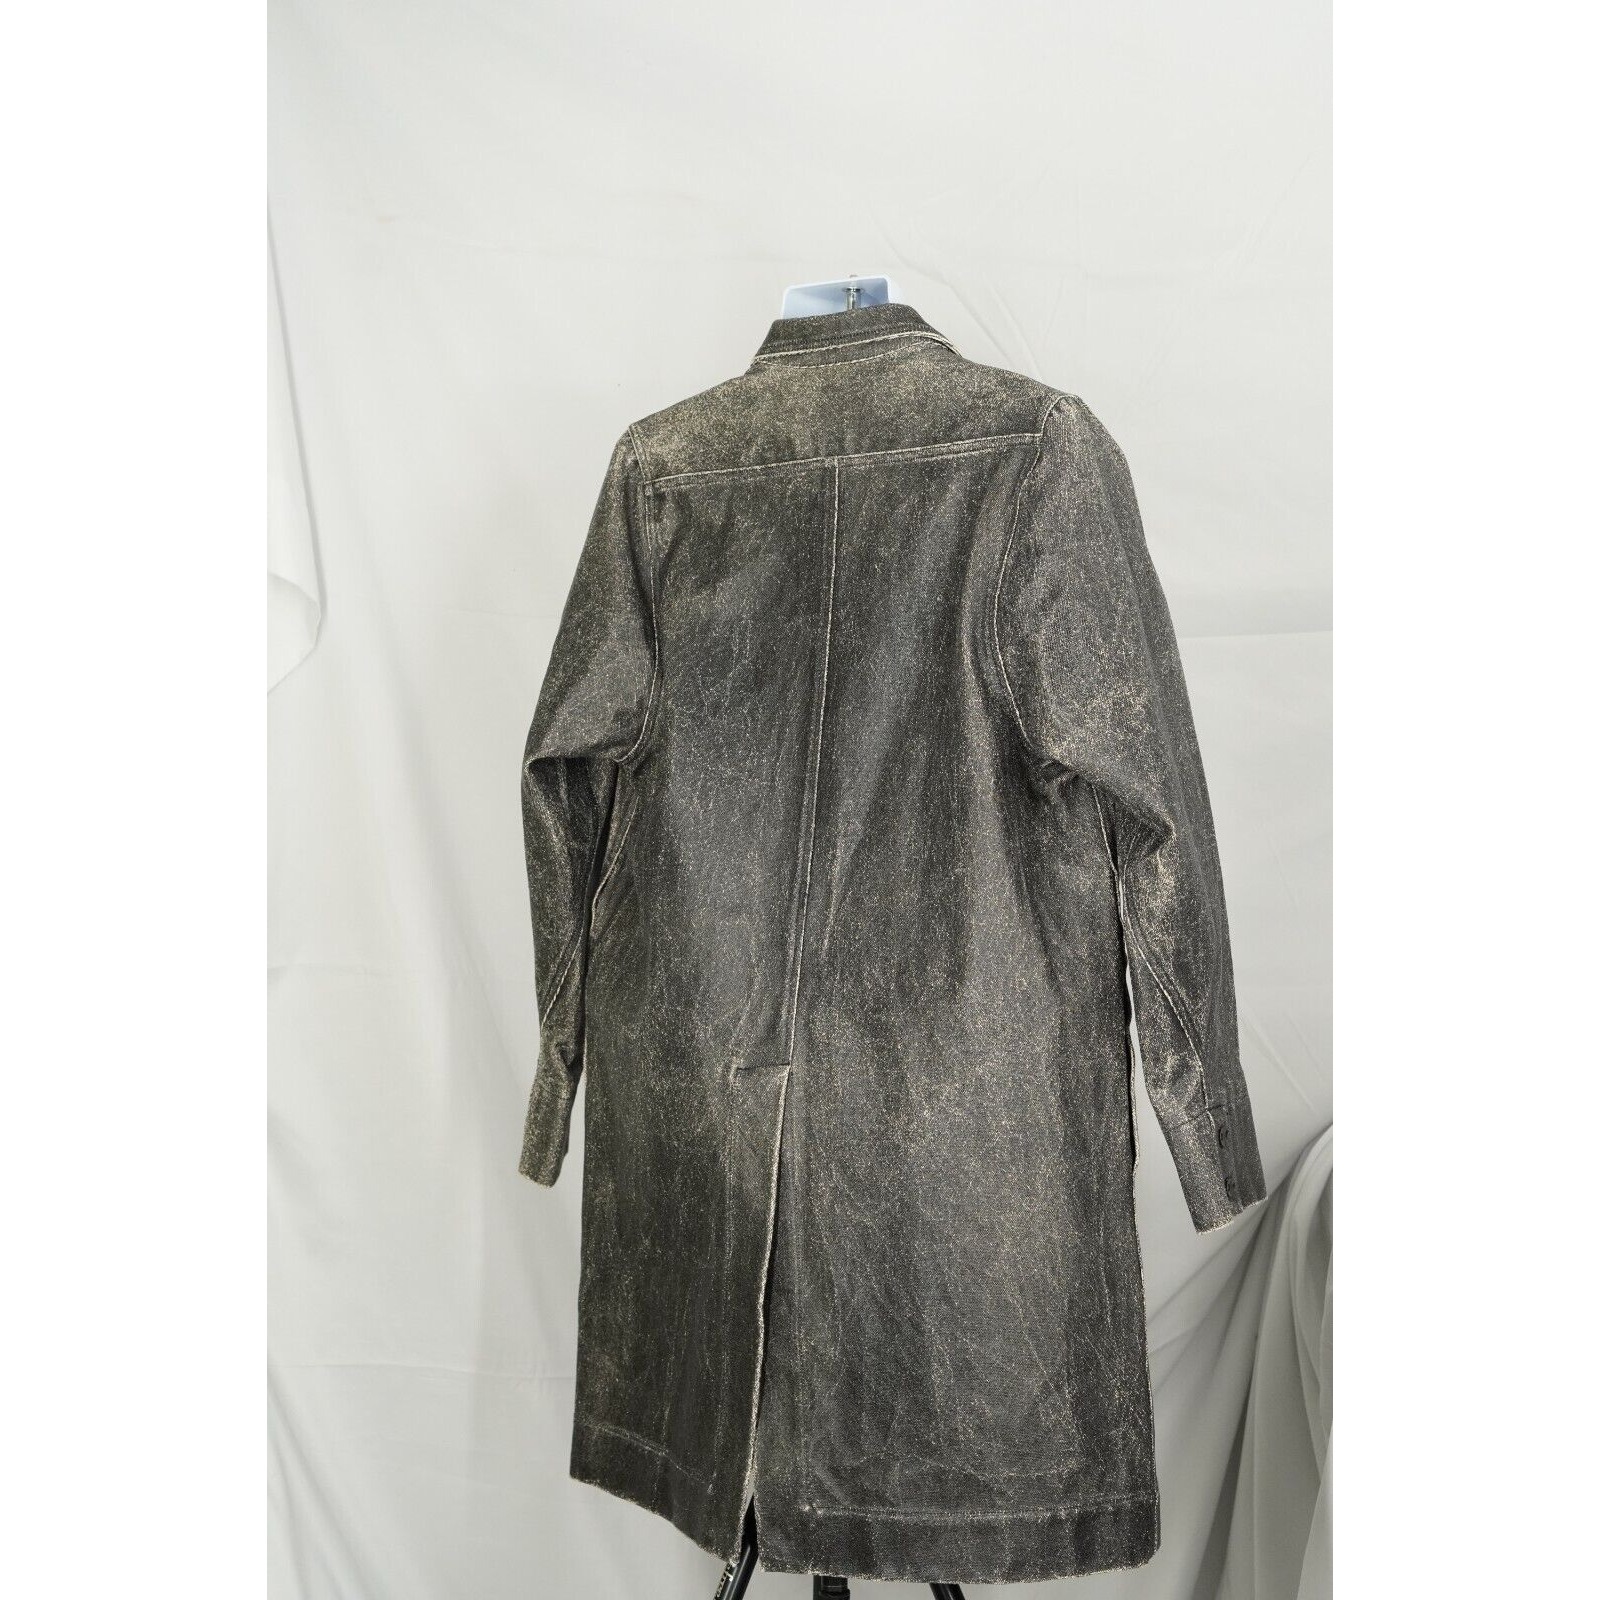 Rick Owens Canvas Trench Coat Waxed / Cracked DRKSHDW - Smal - 10